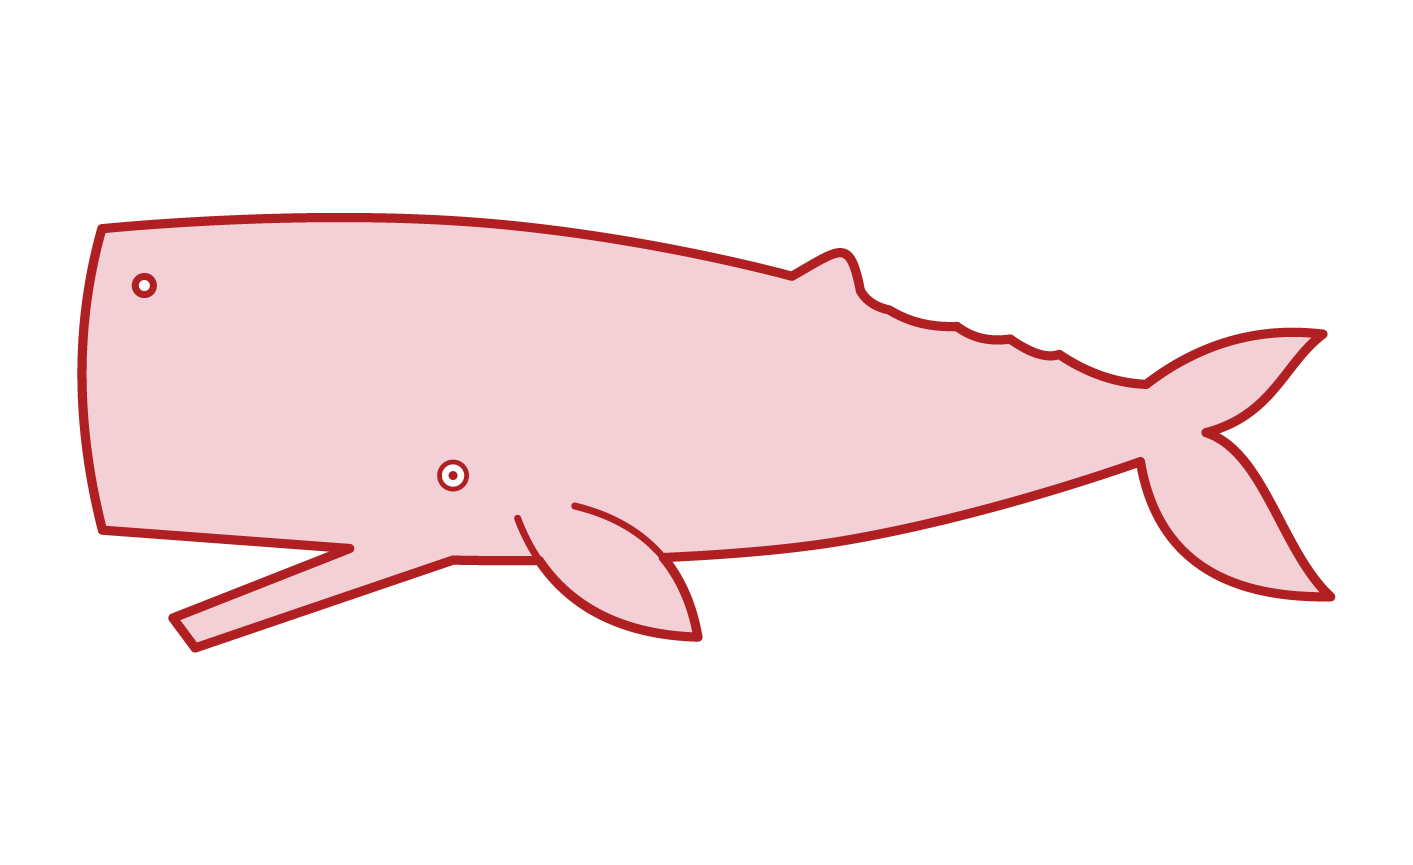 Illustration of the sperm whale